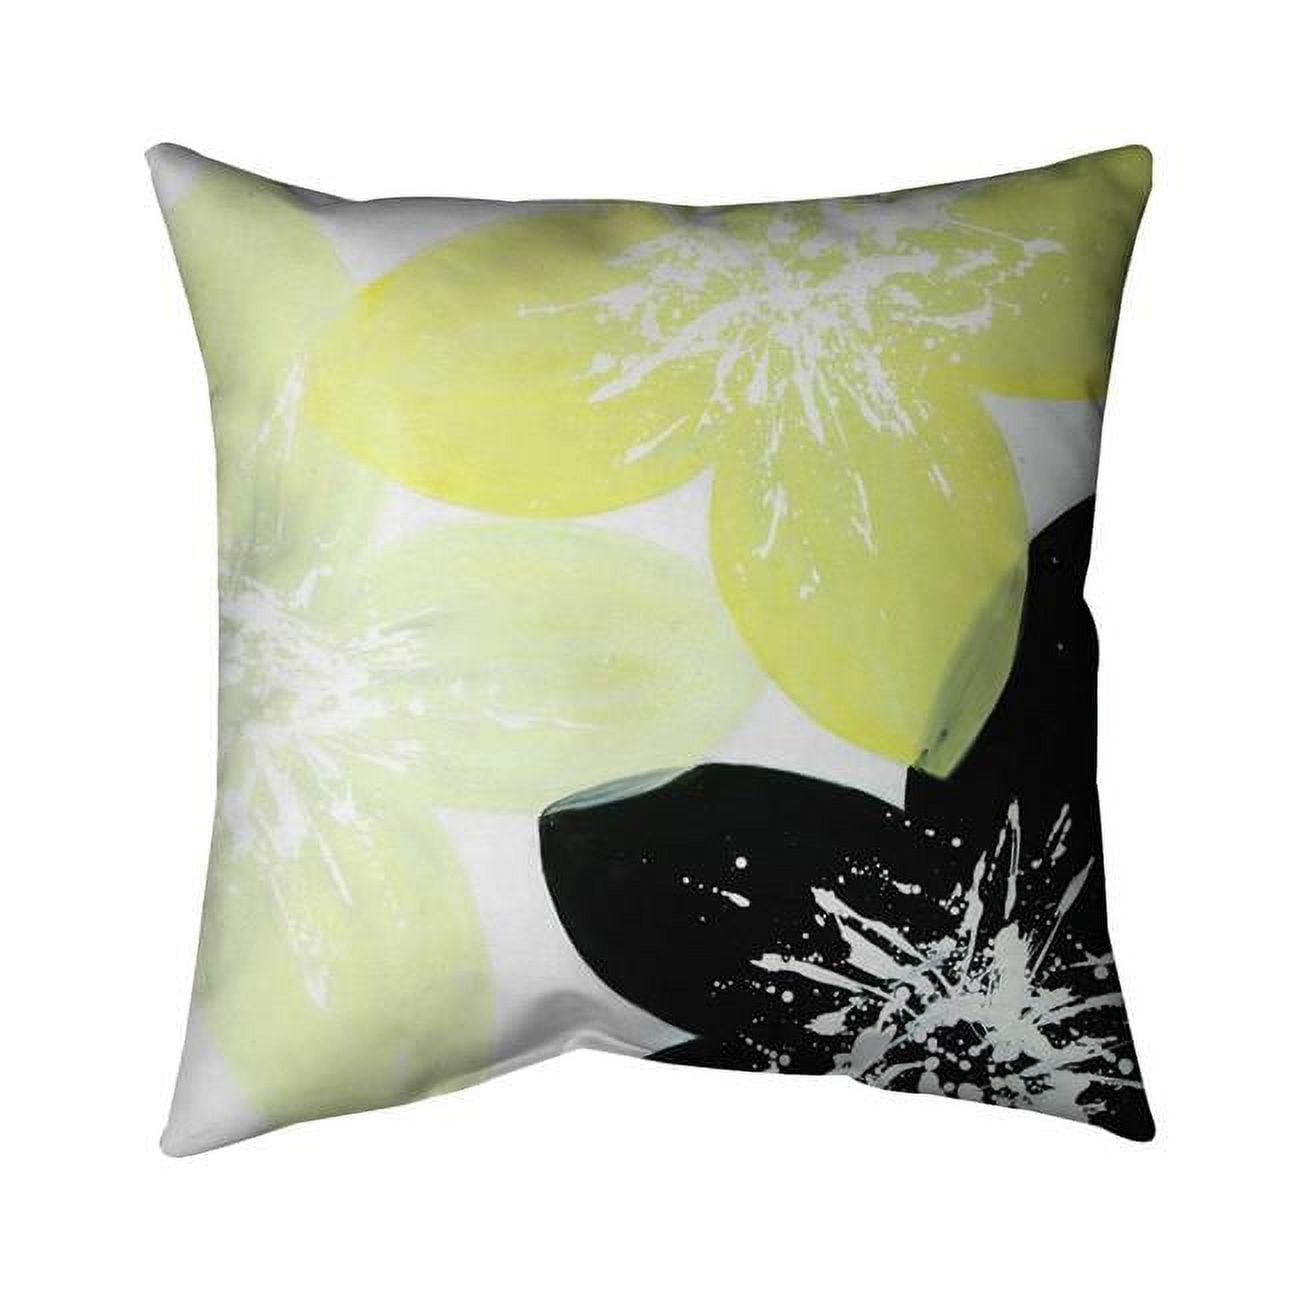 Begin Home Decor 5542-1818-FL236 18 x 18 in. Yellow Flowers with White Center-Double Sided Print Outdoor Pillow Cover